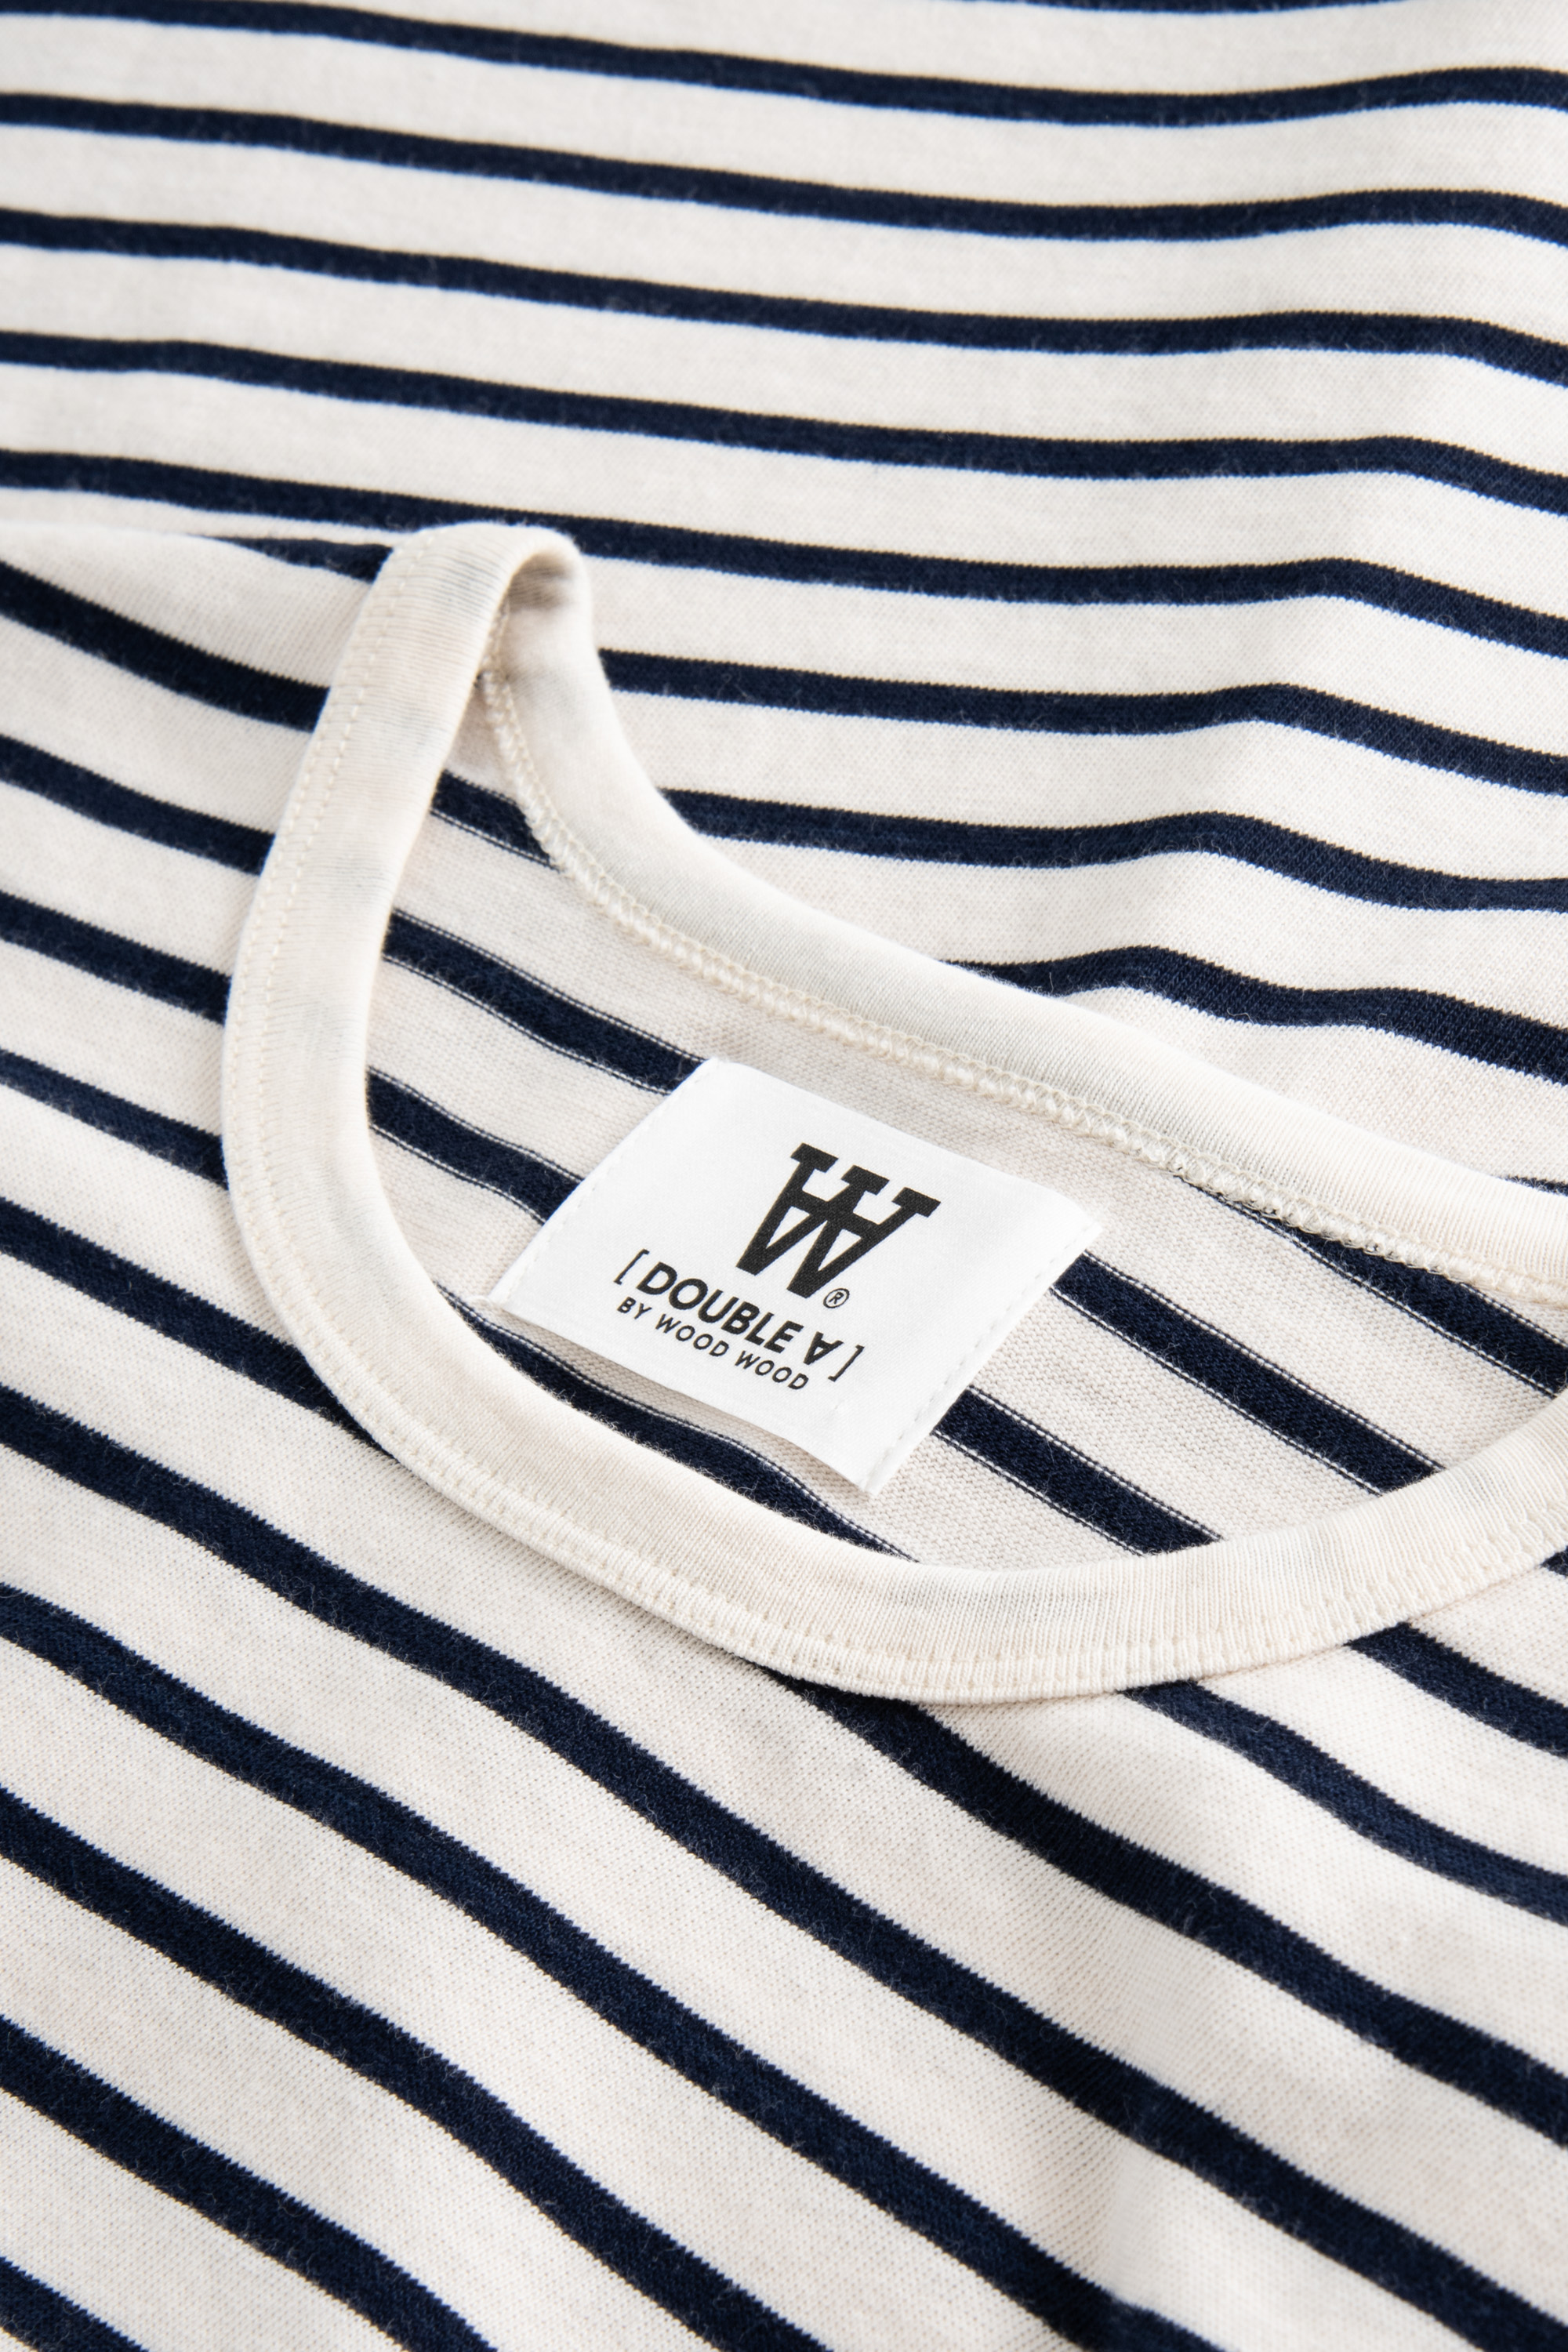 Double A by Wood Wood Moa stripe long sleeve Off-white/navy stripes ...